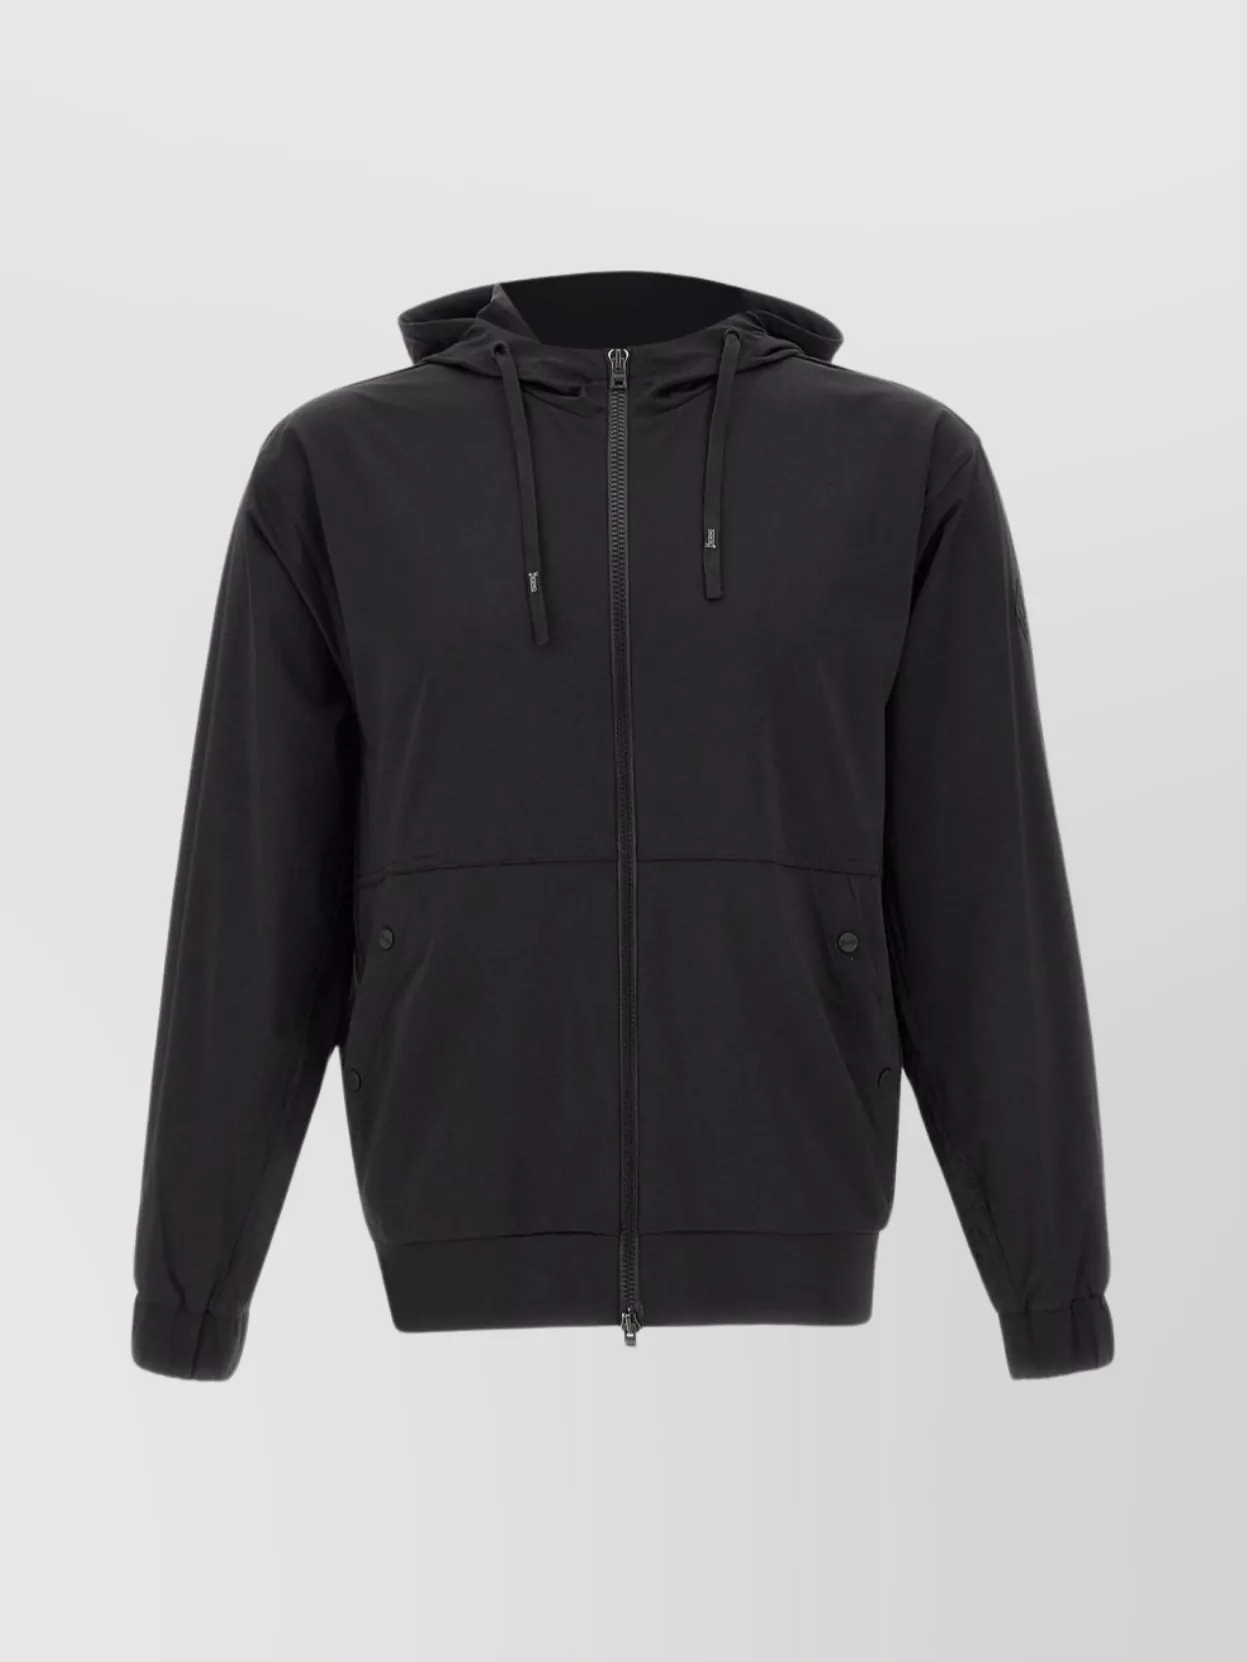 Shop Herno Men's Hooded Sweatshirt With Side Pockets